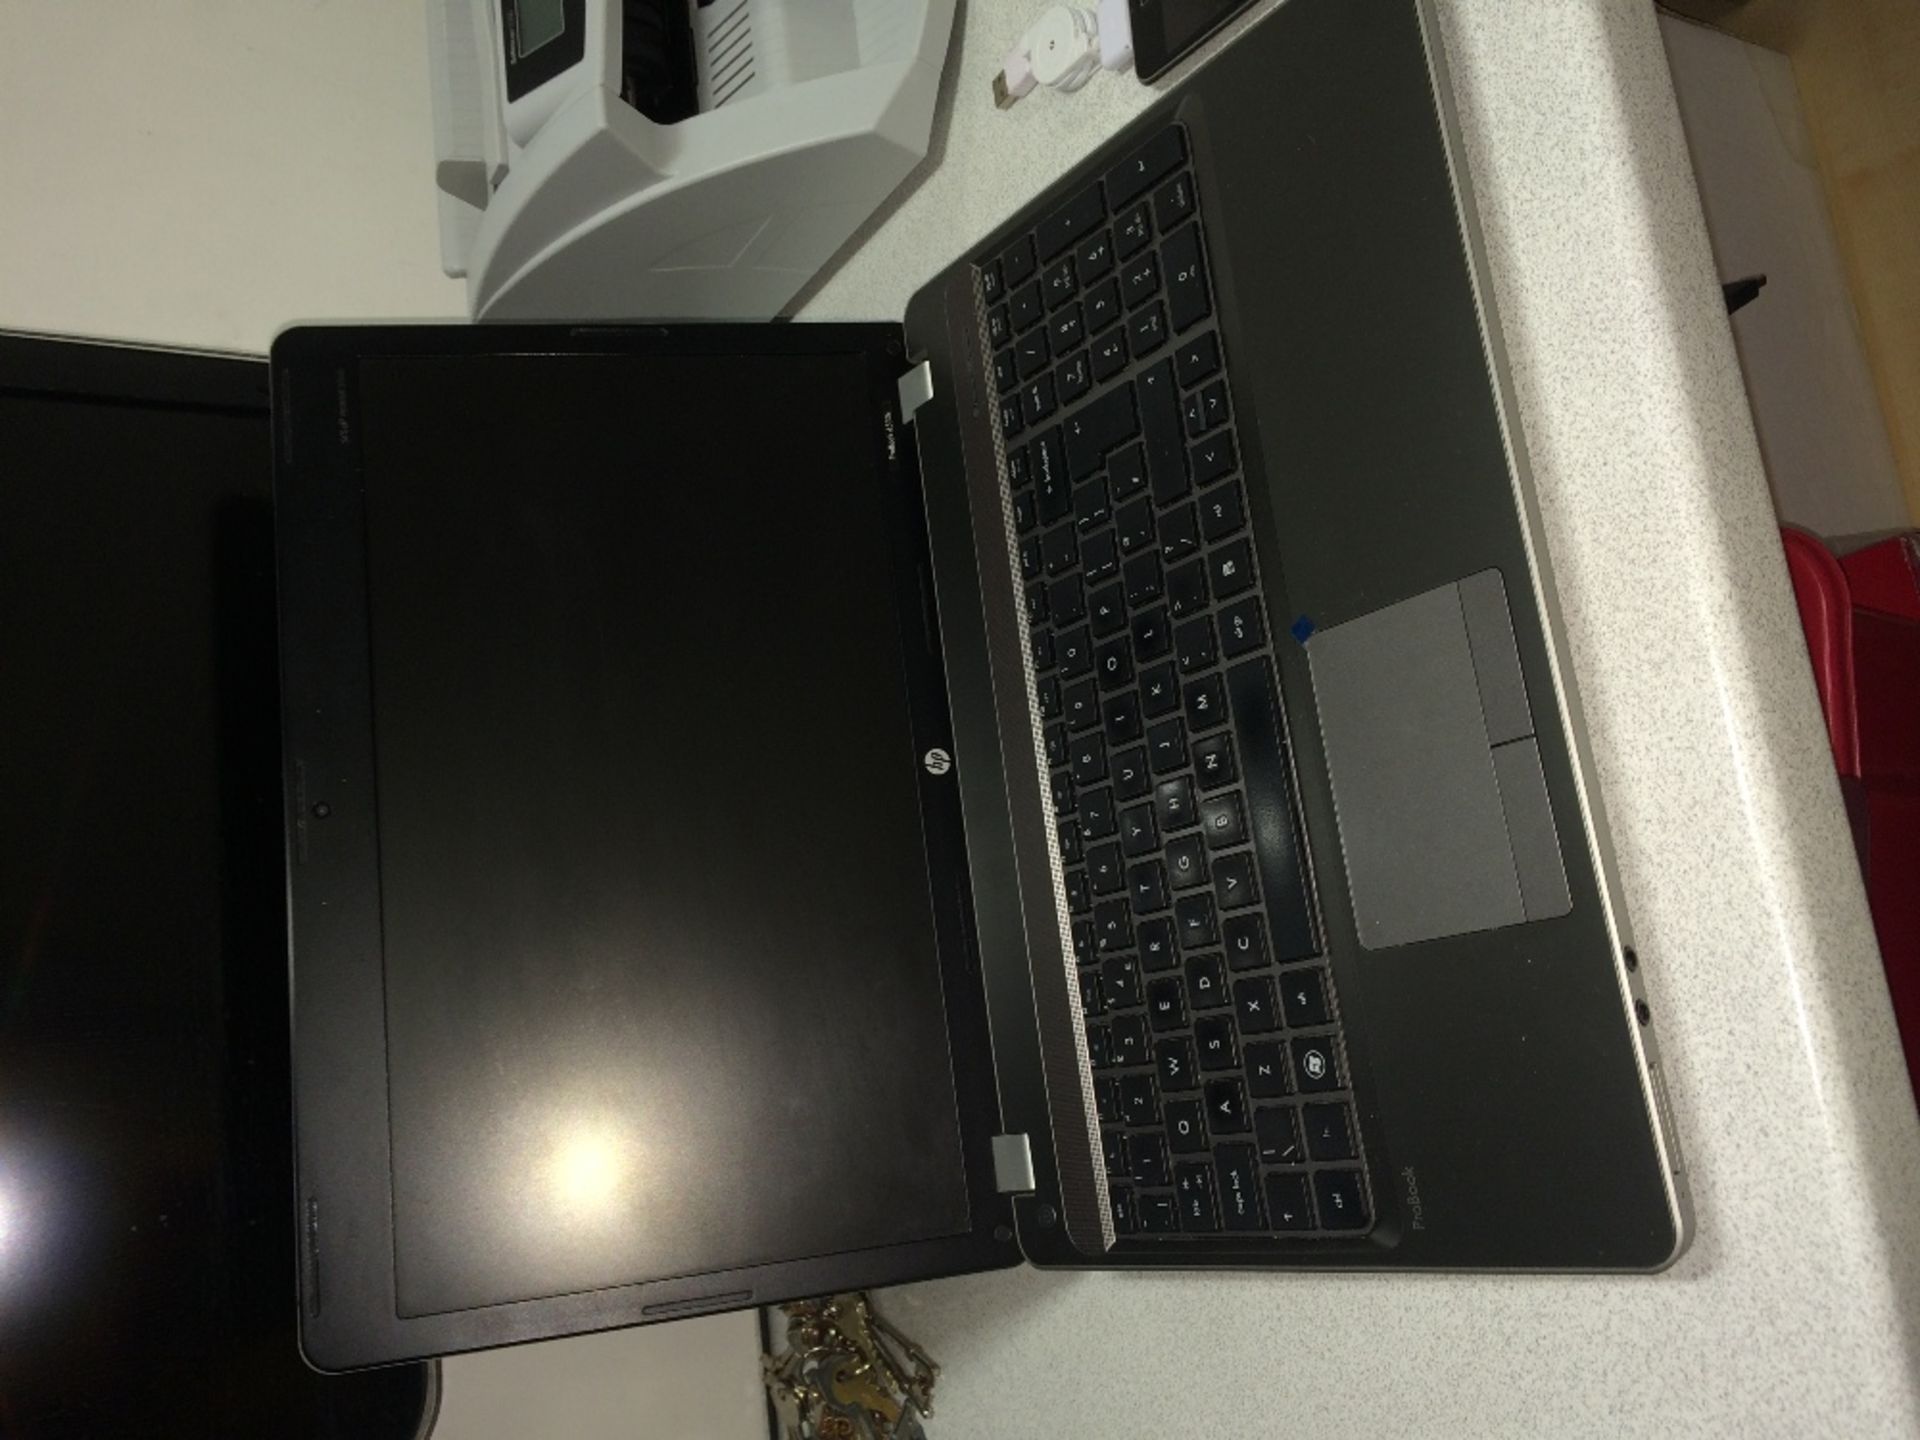 Hp Business Laptop Running Windonws 10, High Spec Laptop With Daslight Lighting Control Software And